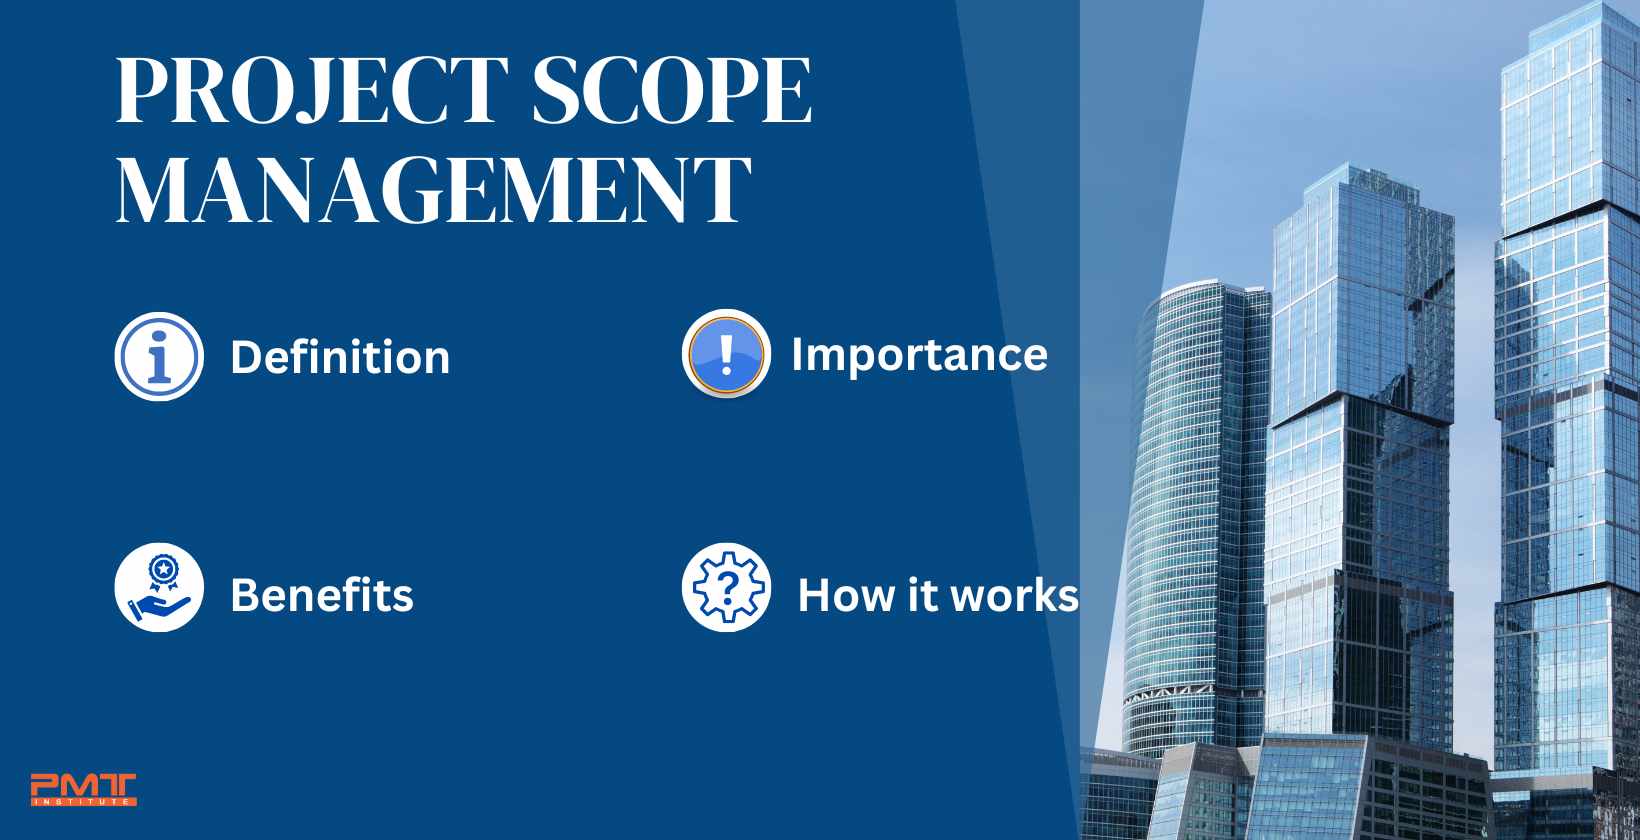 Project Scope Management: Definition, Importance, Benefits, and How It Works